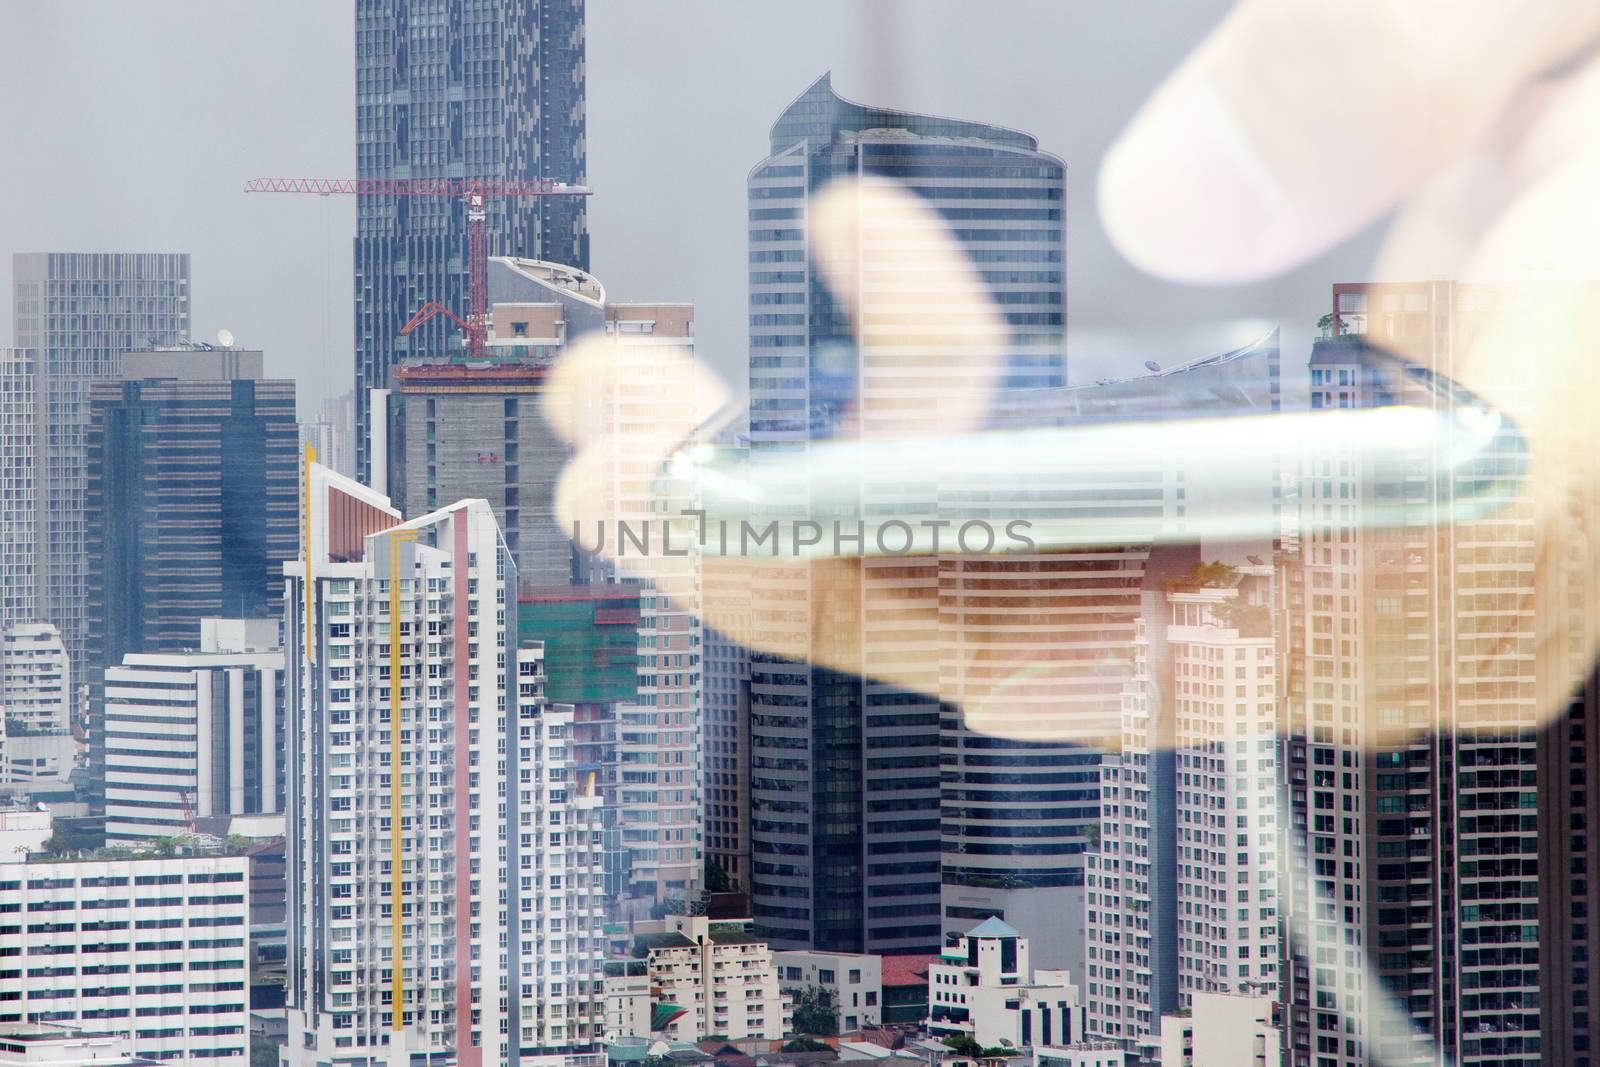 Double exposure image of people with smart phone and cityscape background,communication technology concept.